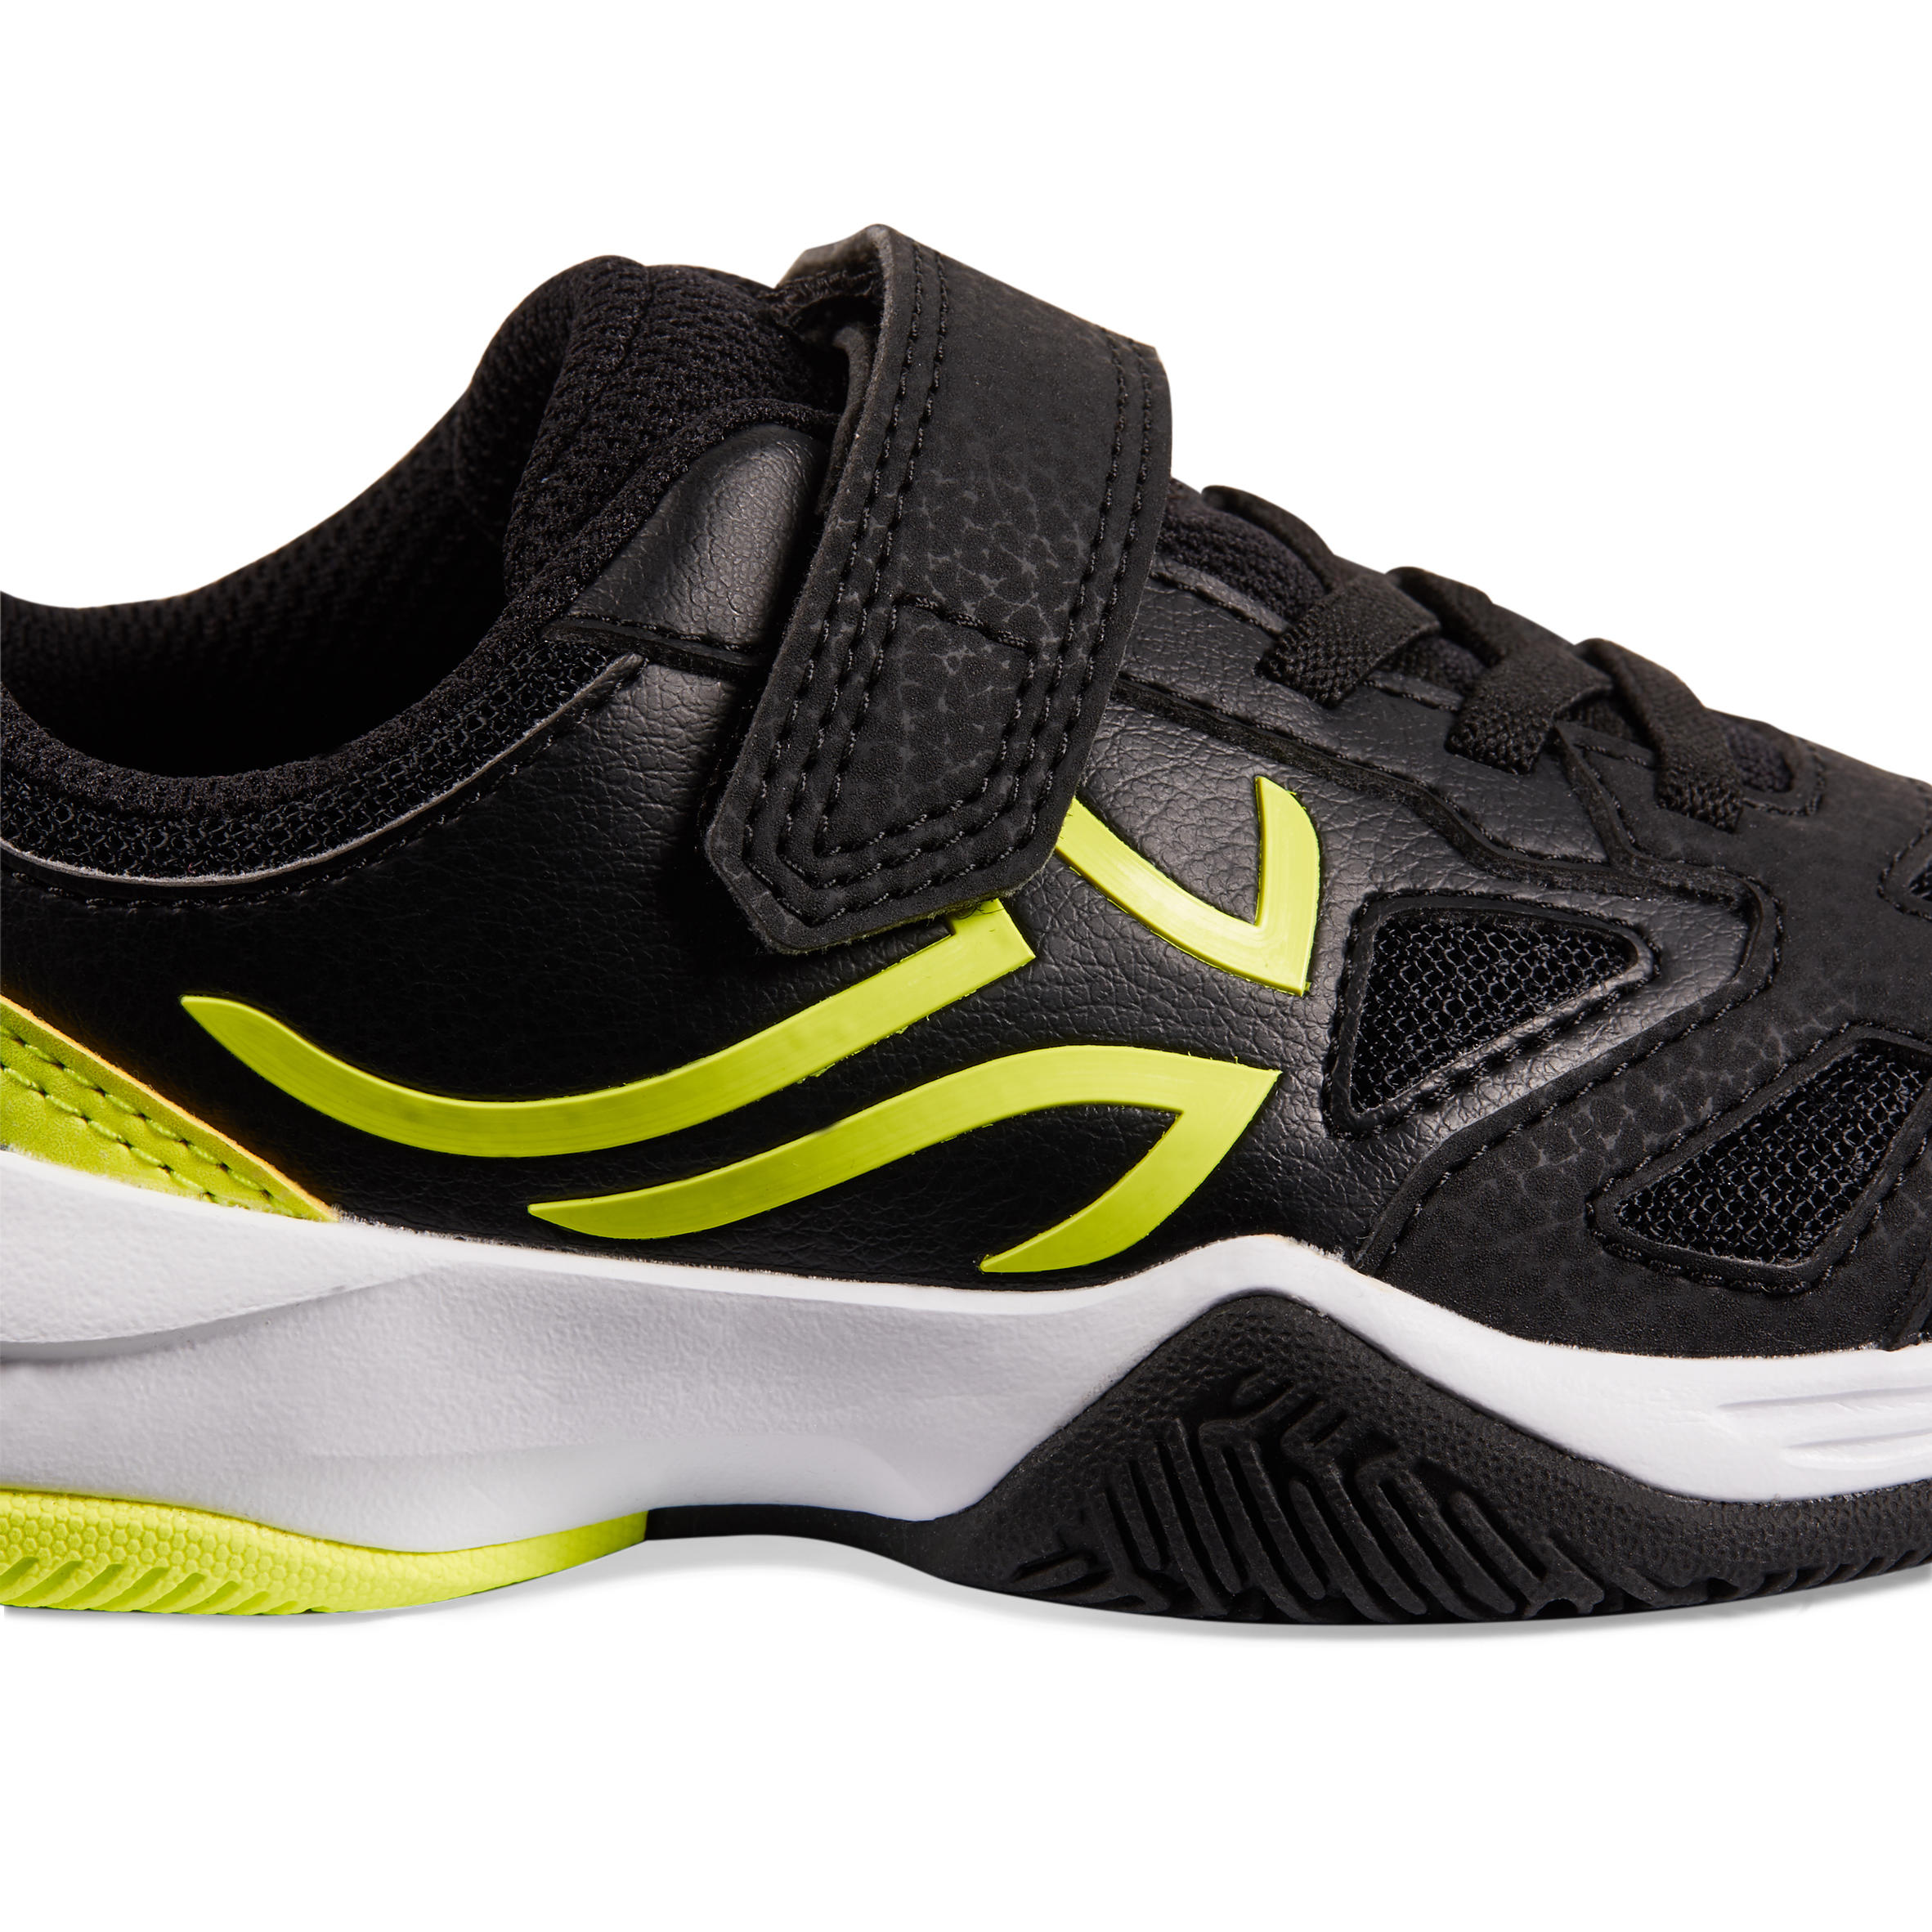 black and yellow tennis shoes